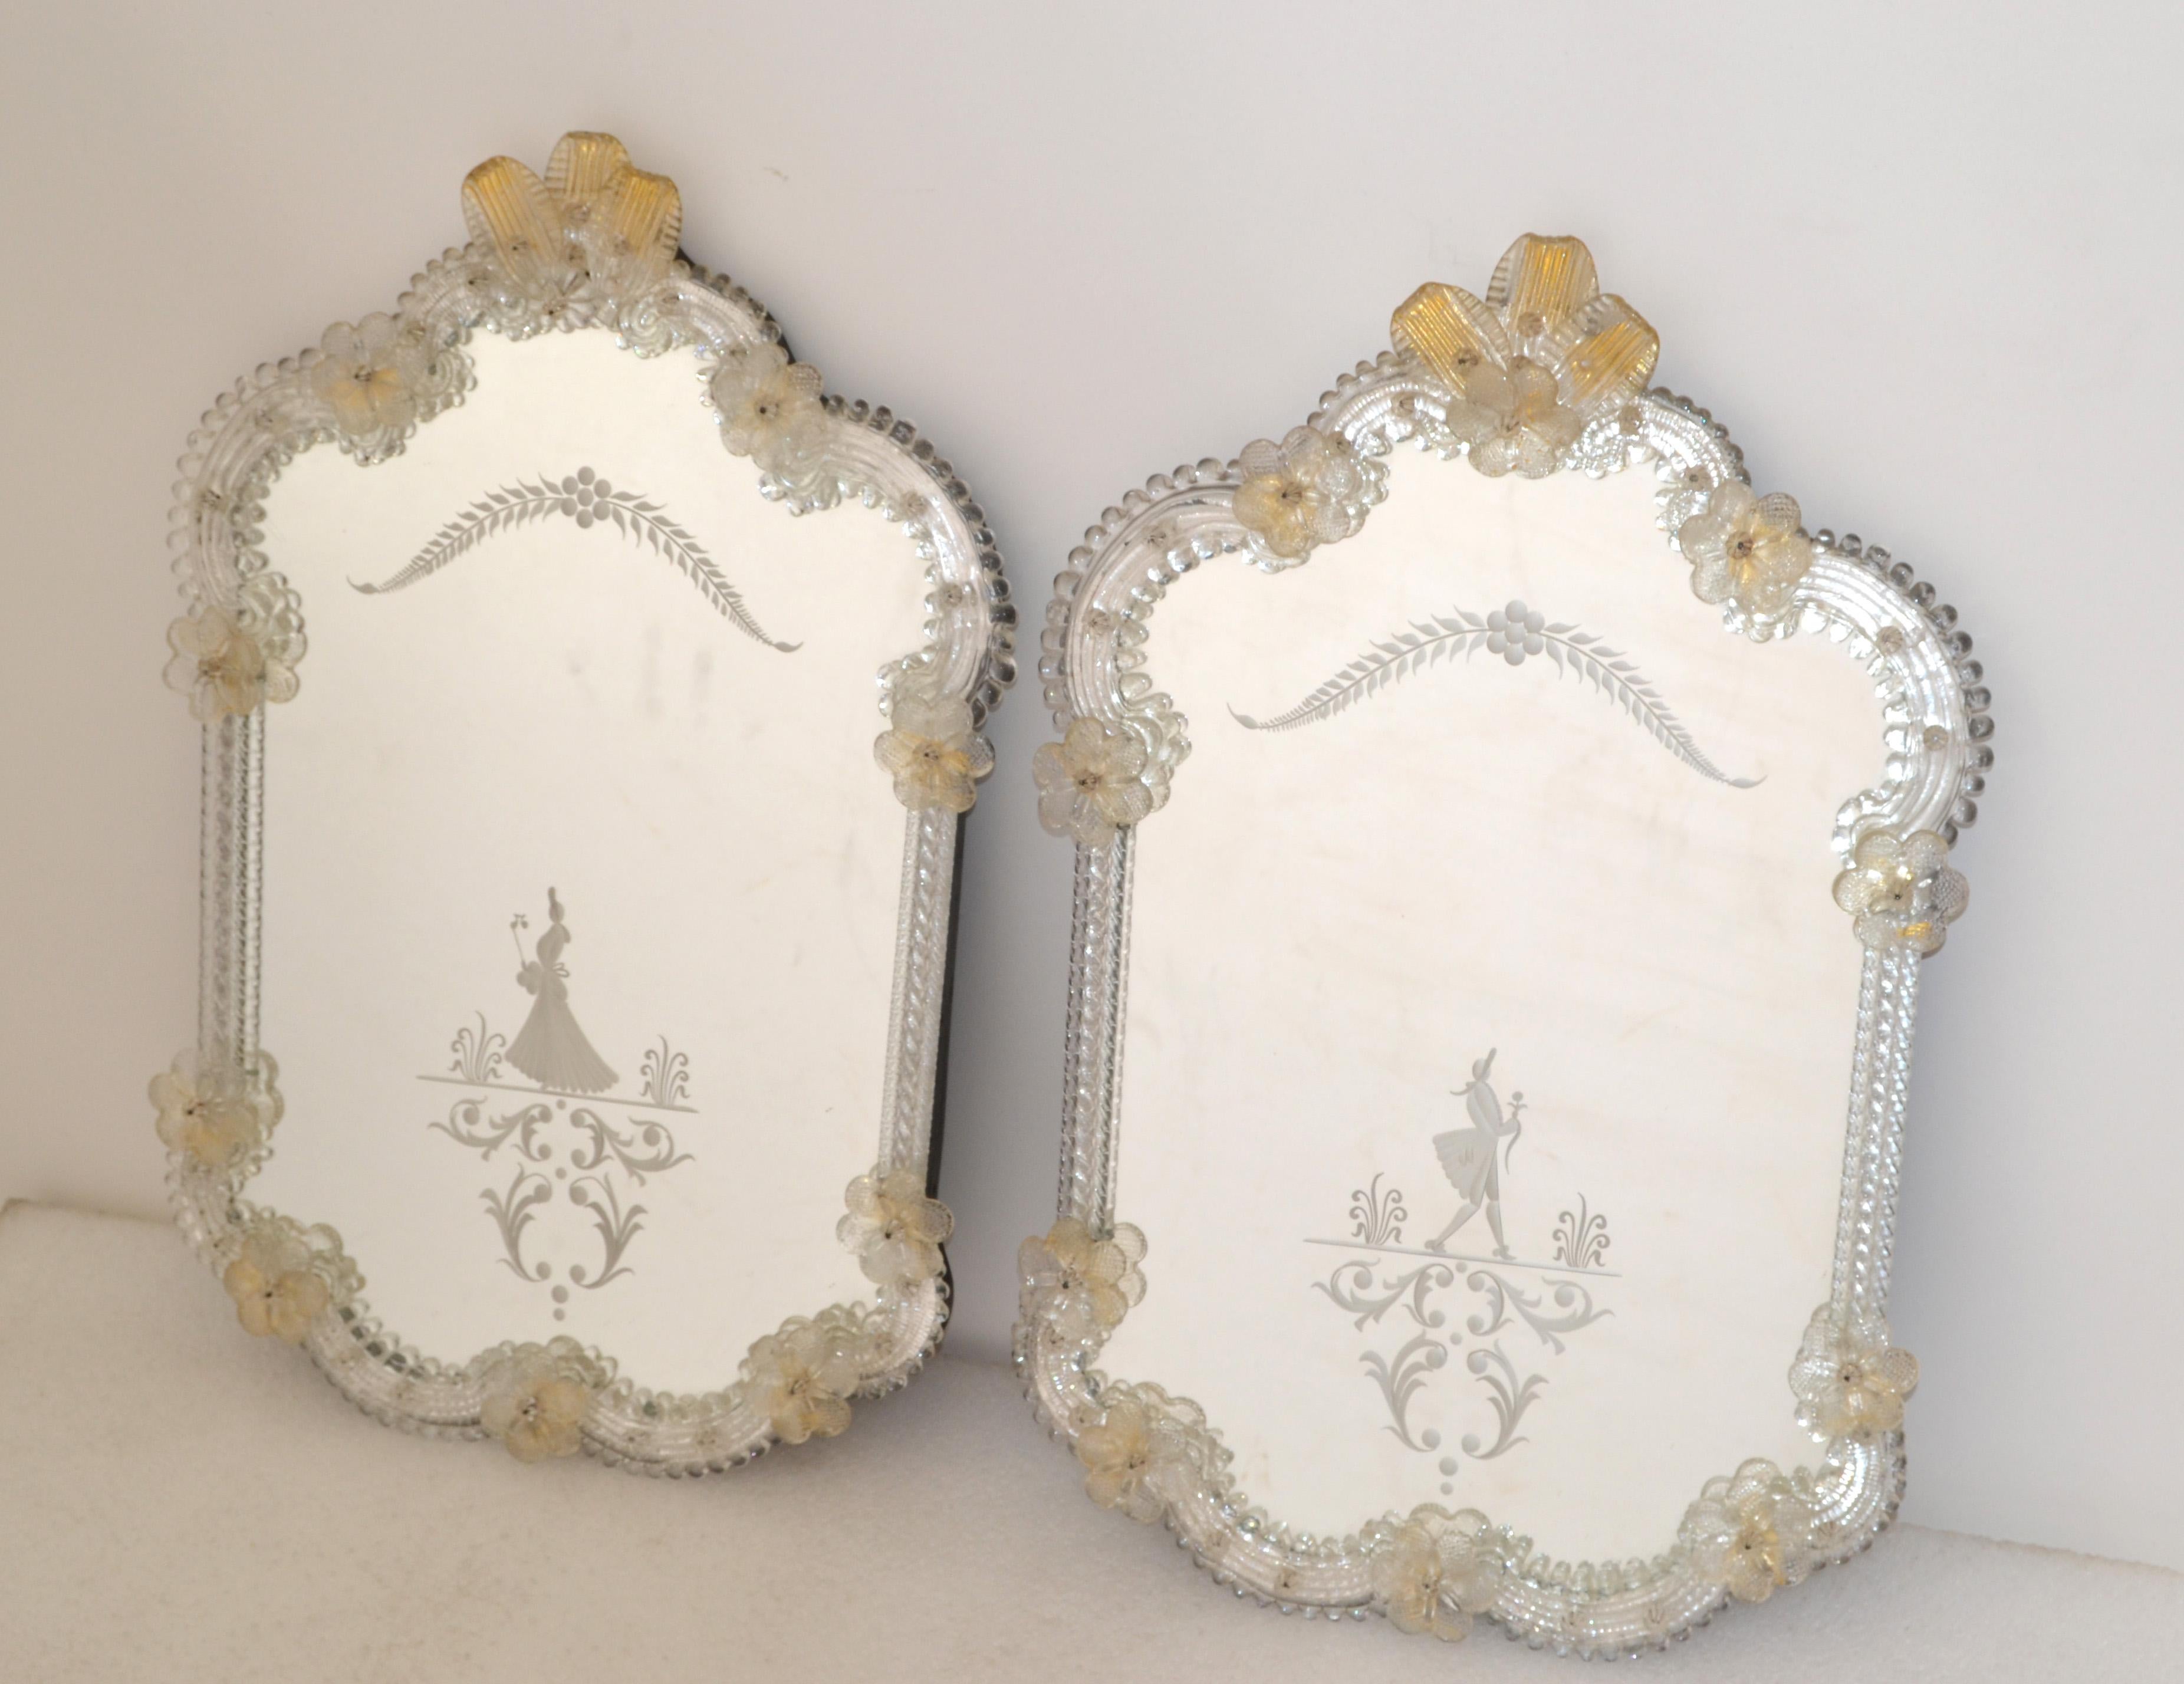 Italian Rococo Revival Him and Her Etched Venetian Wall Mirror Bohemian Golden Flowers For Sale